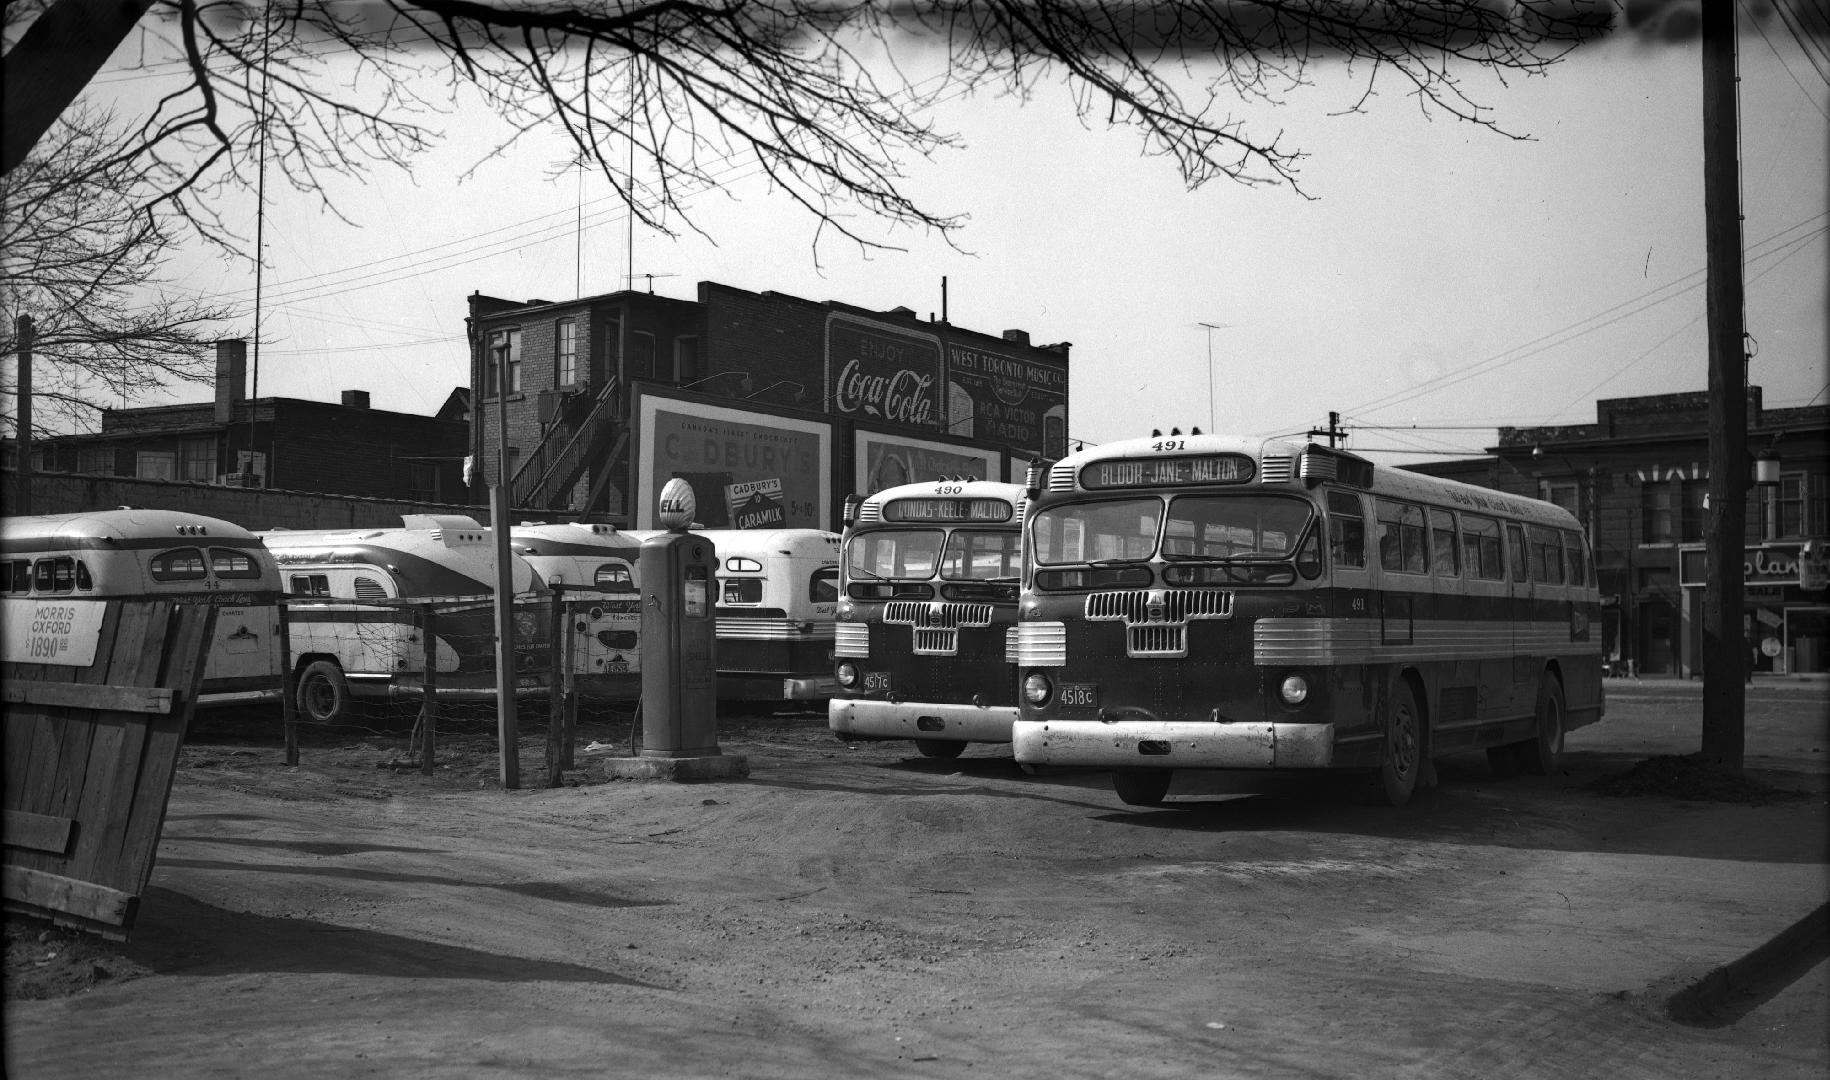 West York Coach Lines, garage [parking lot], Dundas Street West, southwest corner Pacific Avenue, looking north to Dundas St., showing, l. to r., buses #490 & #491 in foreground